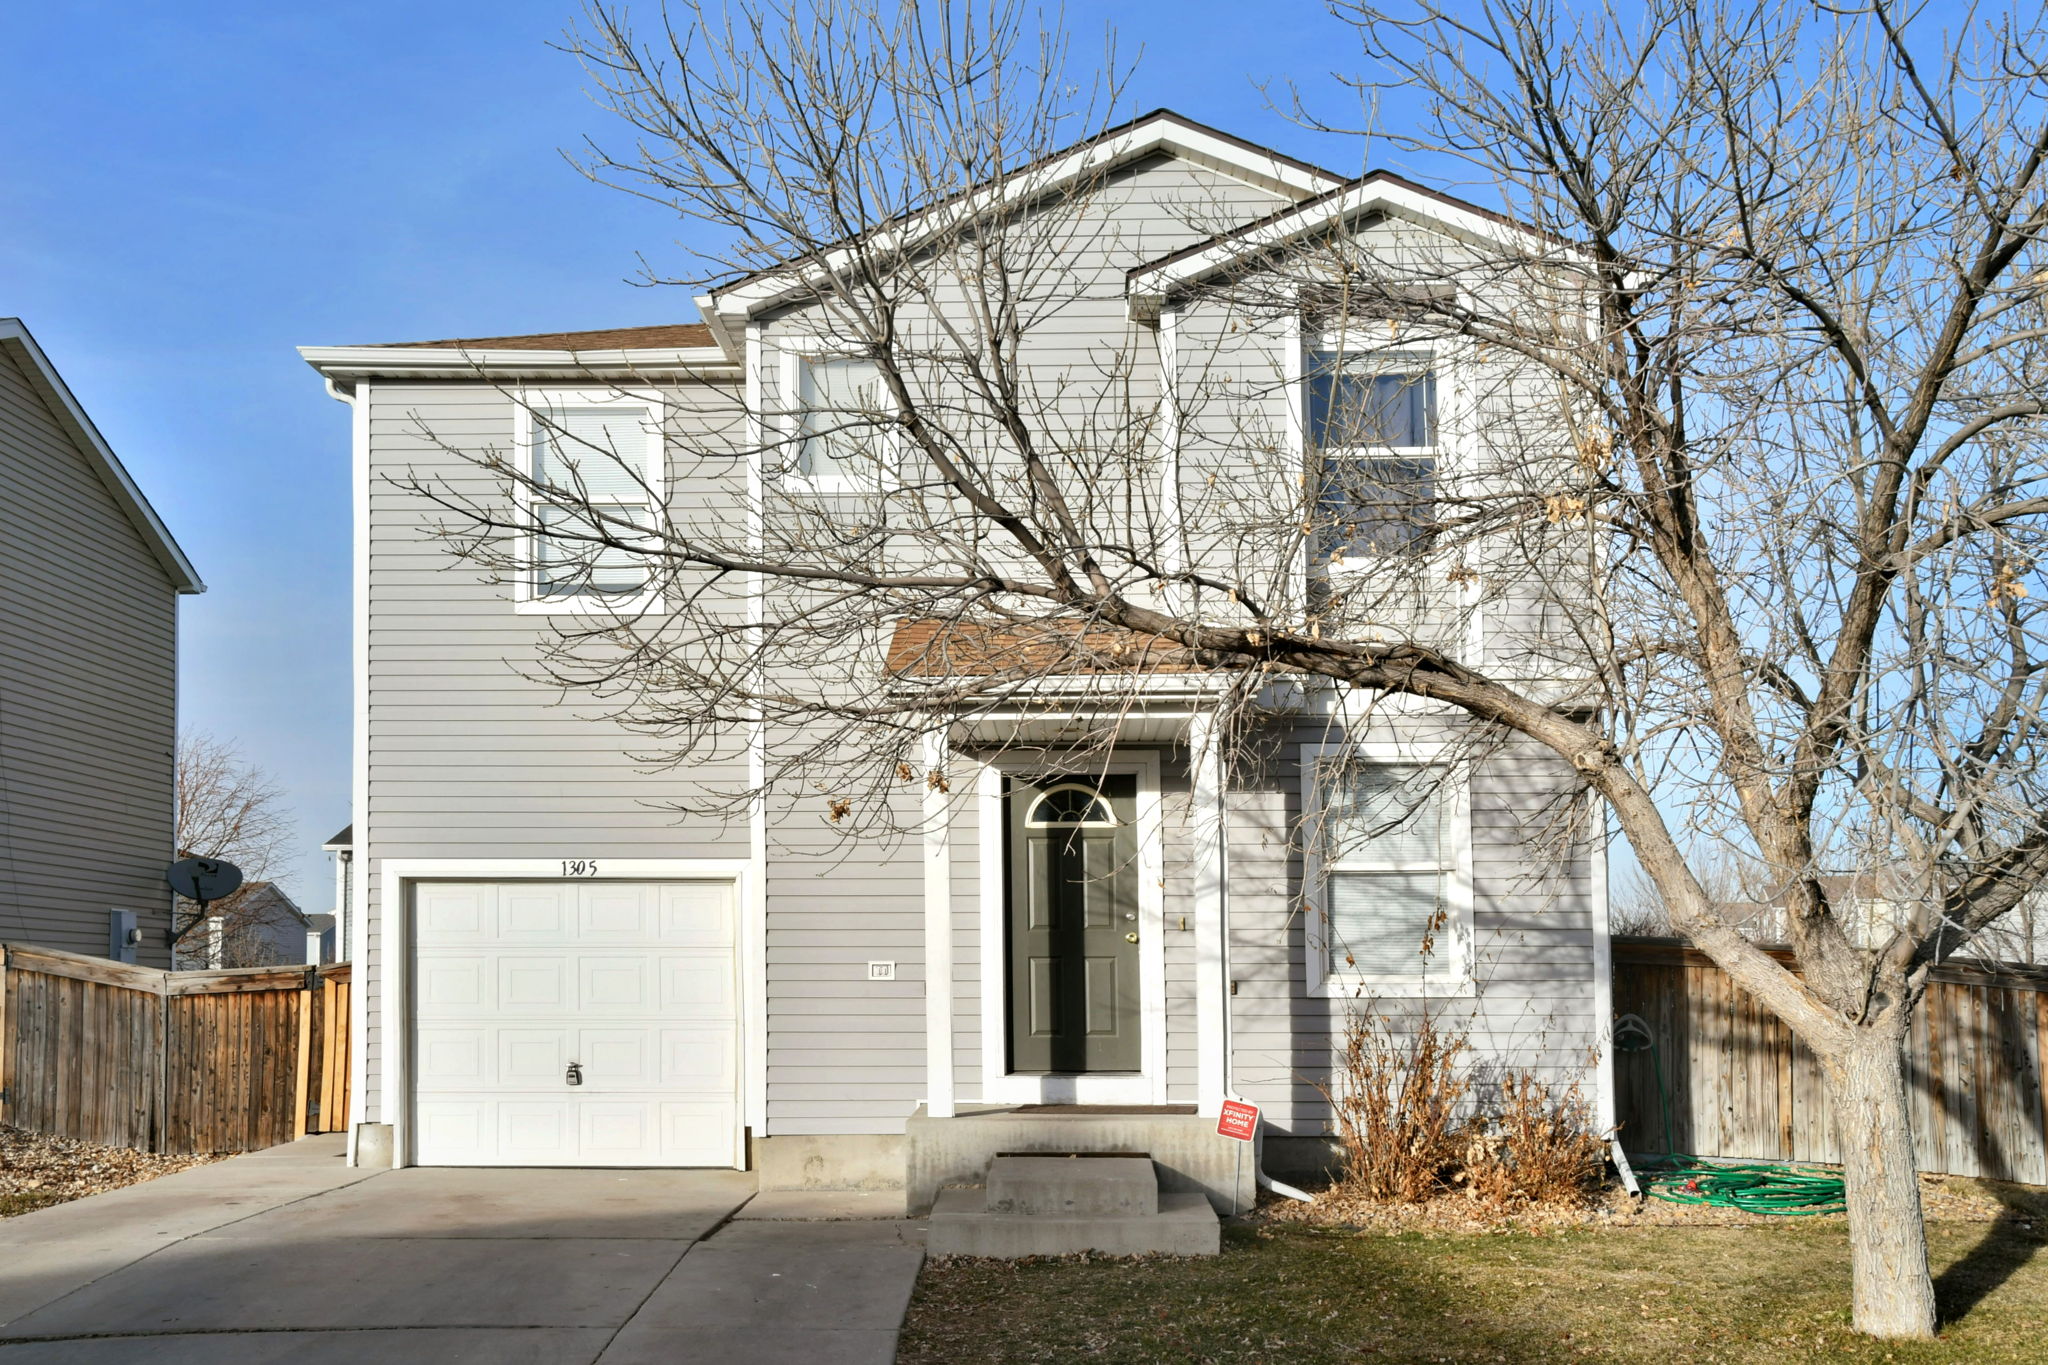  1305 Waxwing Ave, Brighton, CO 80601, US